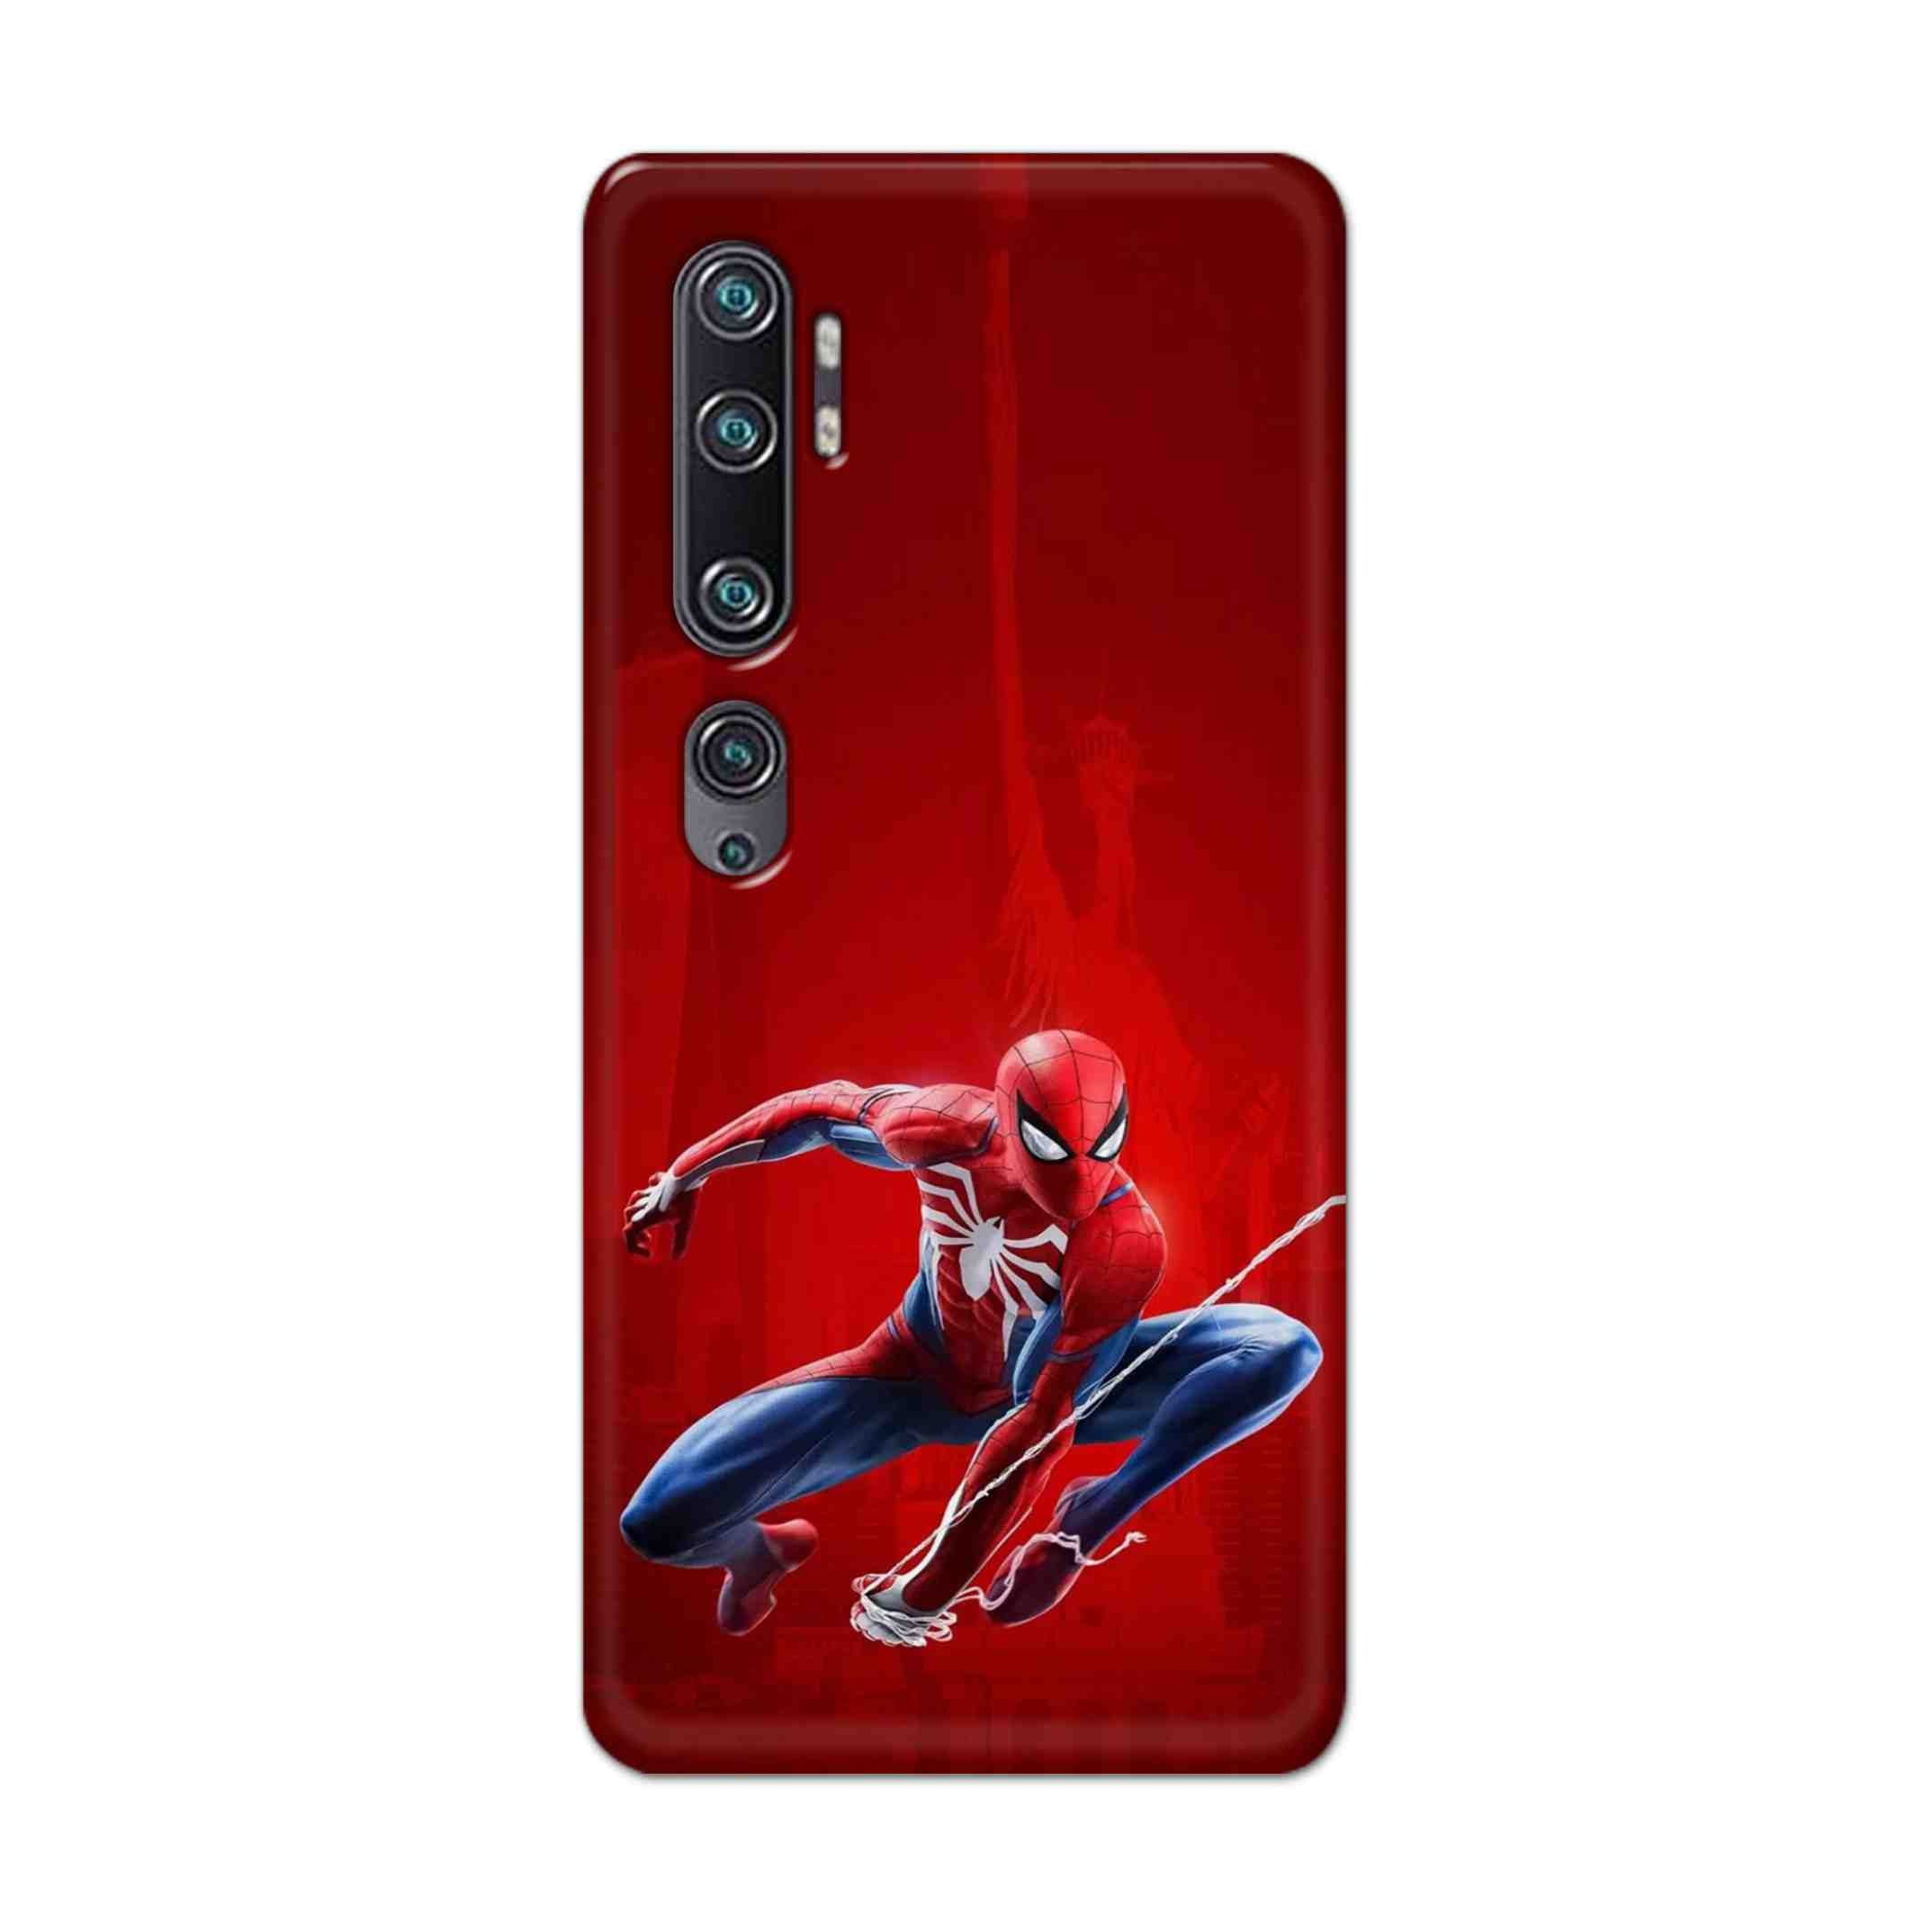 Buy Spiderman Hard Back Mobile Phone Case Cover For Xiaomi Mi Note 10 Online